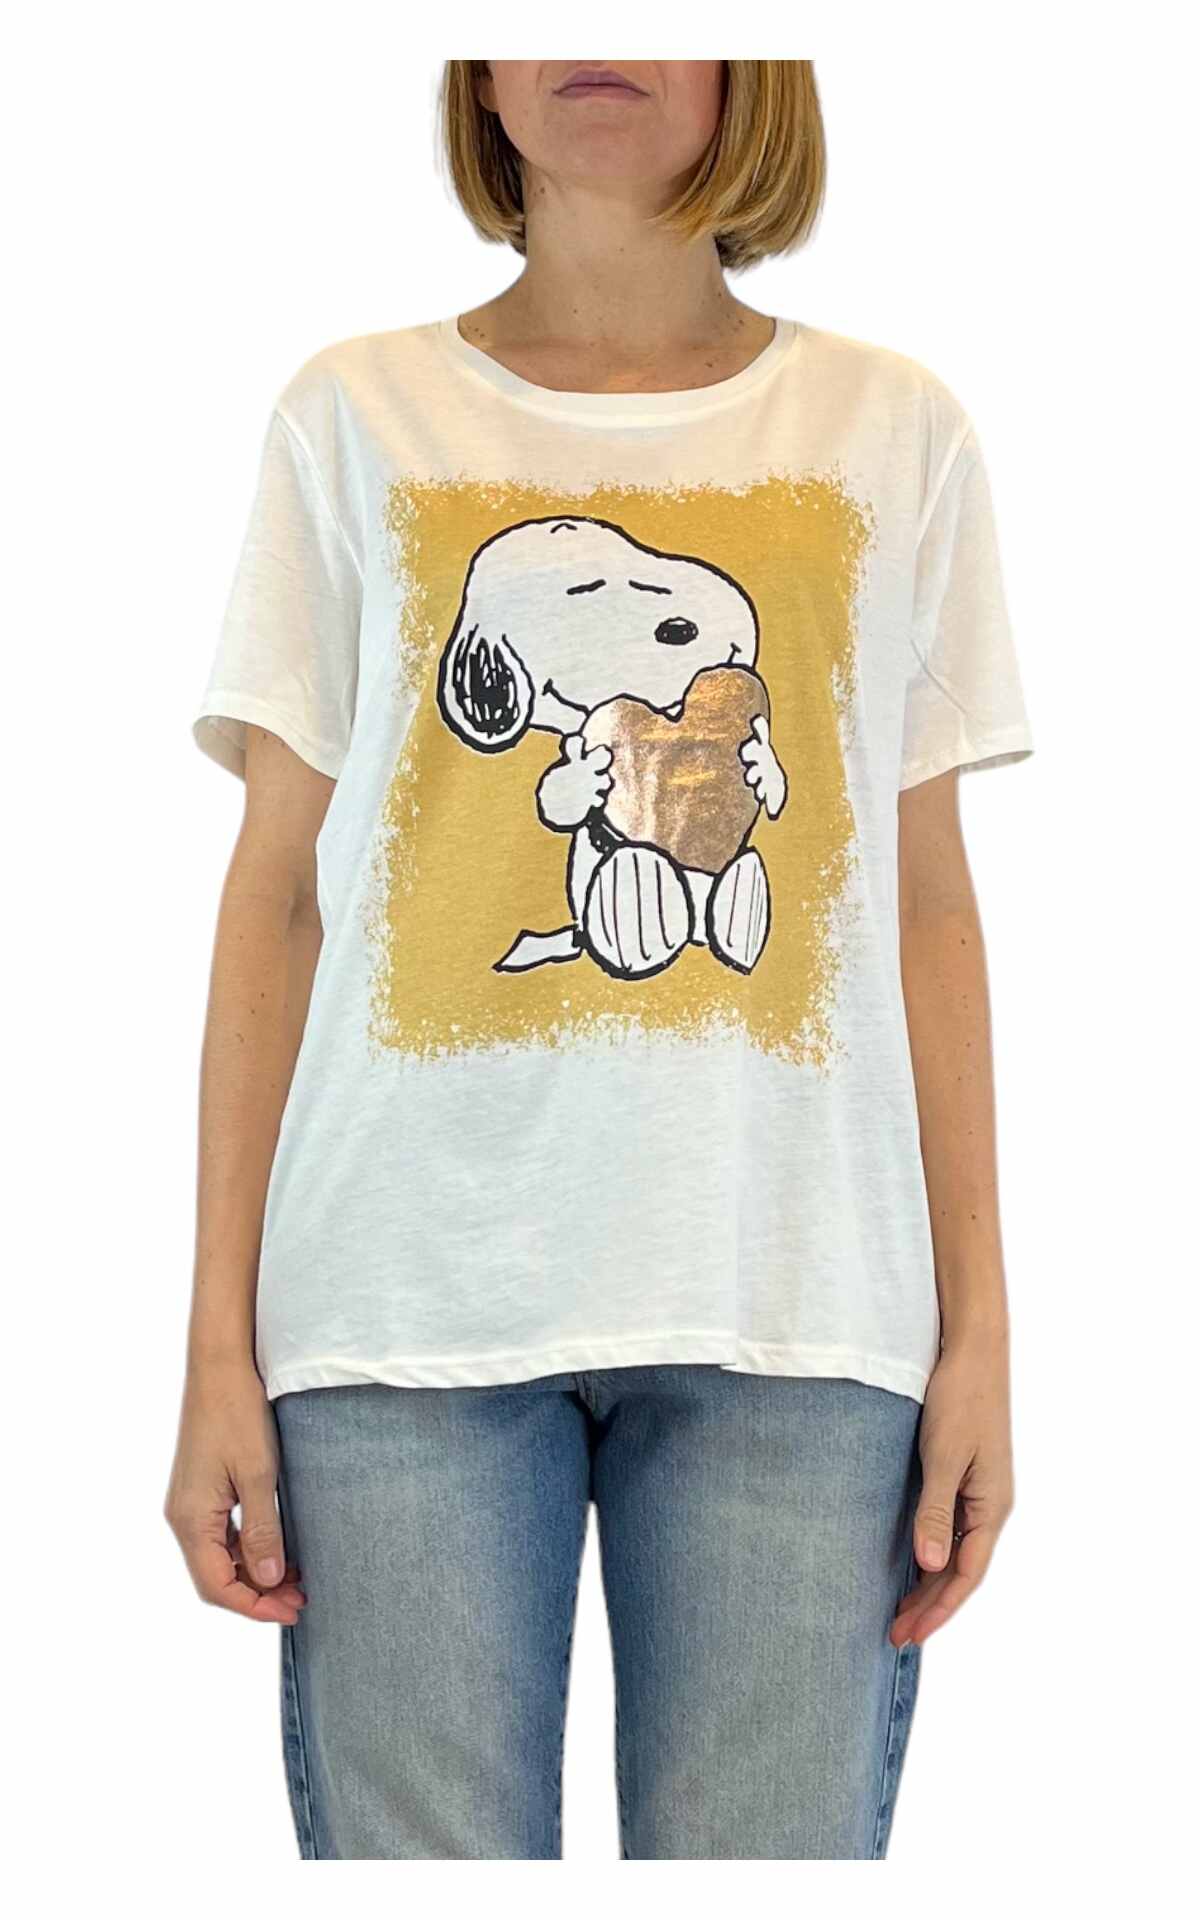 Off-on - T-shirt stampa snoopy - beige